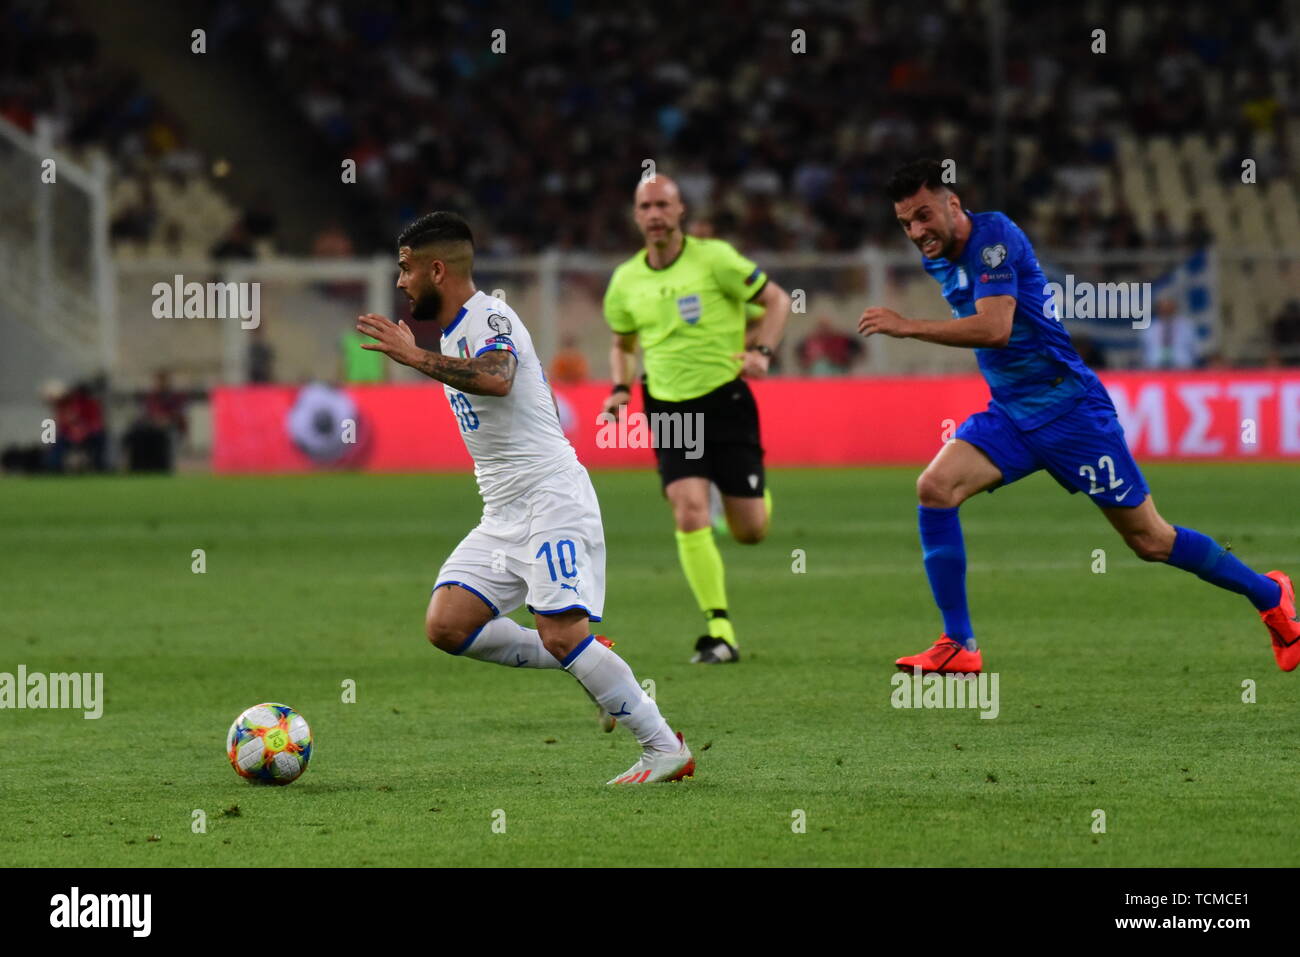 Athens, Greece. 08th June, 2019. Lorenzo Insigne (no 10) of Italy and Andreas Samaris (no 22) of Greece, vies for the ball. Credit: Dimitrios Karvountzis/Pacific Press/Alamy Live News Stock Photo